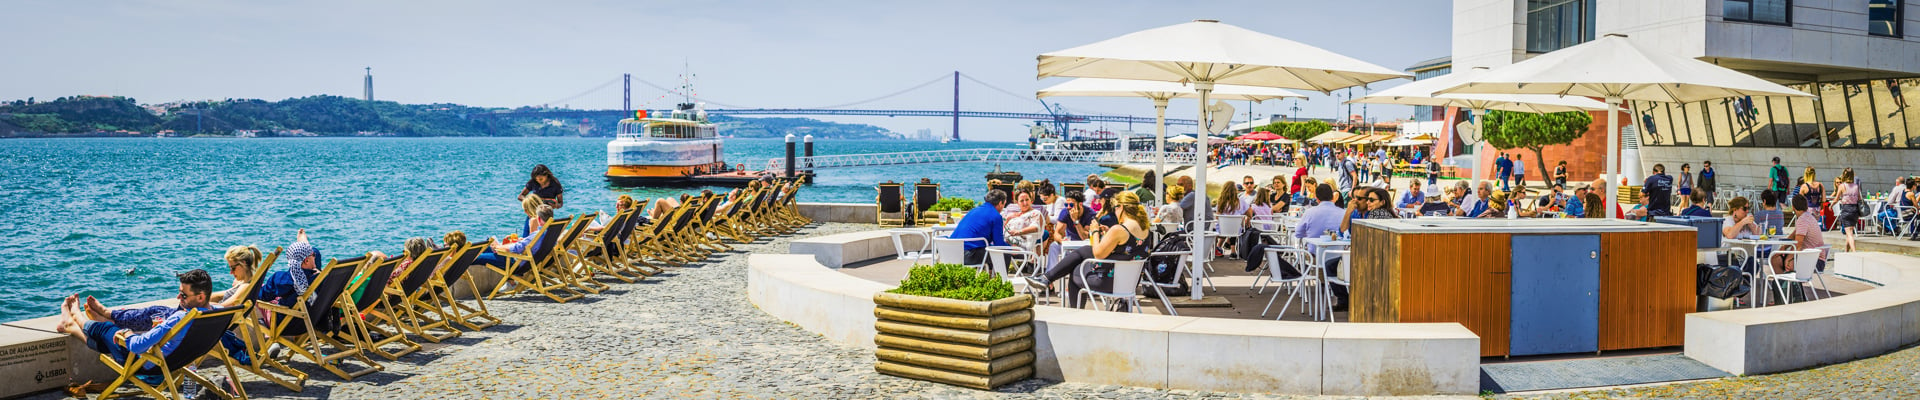 Along the Tagus Waterfront in Lisbon